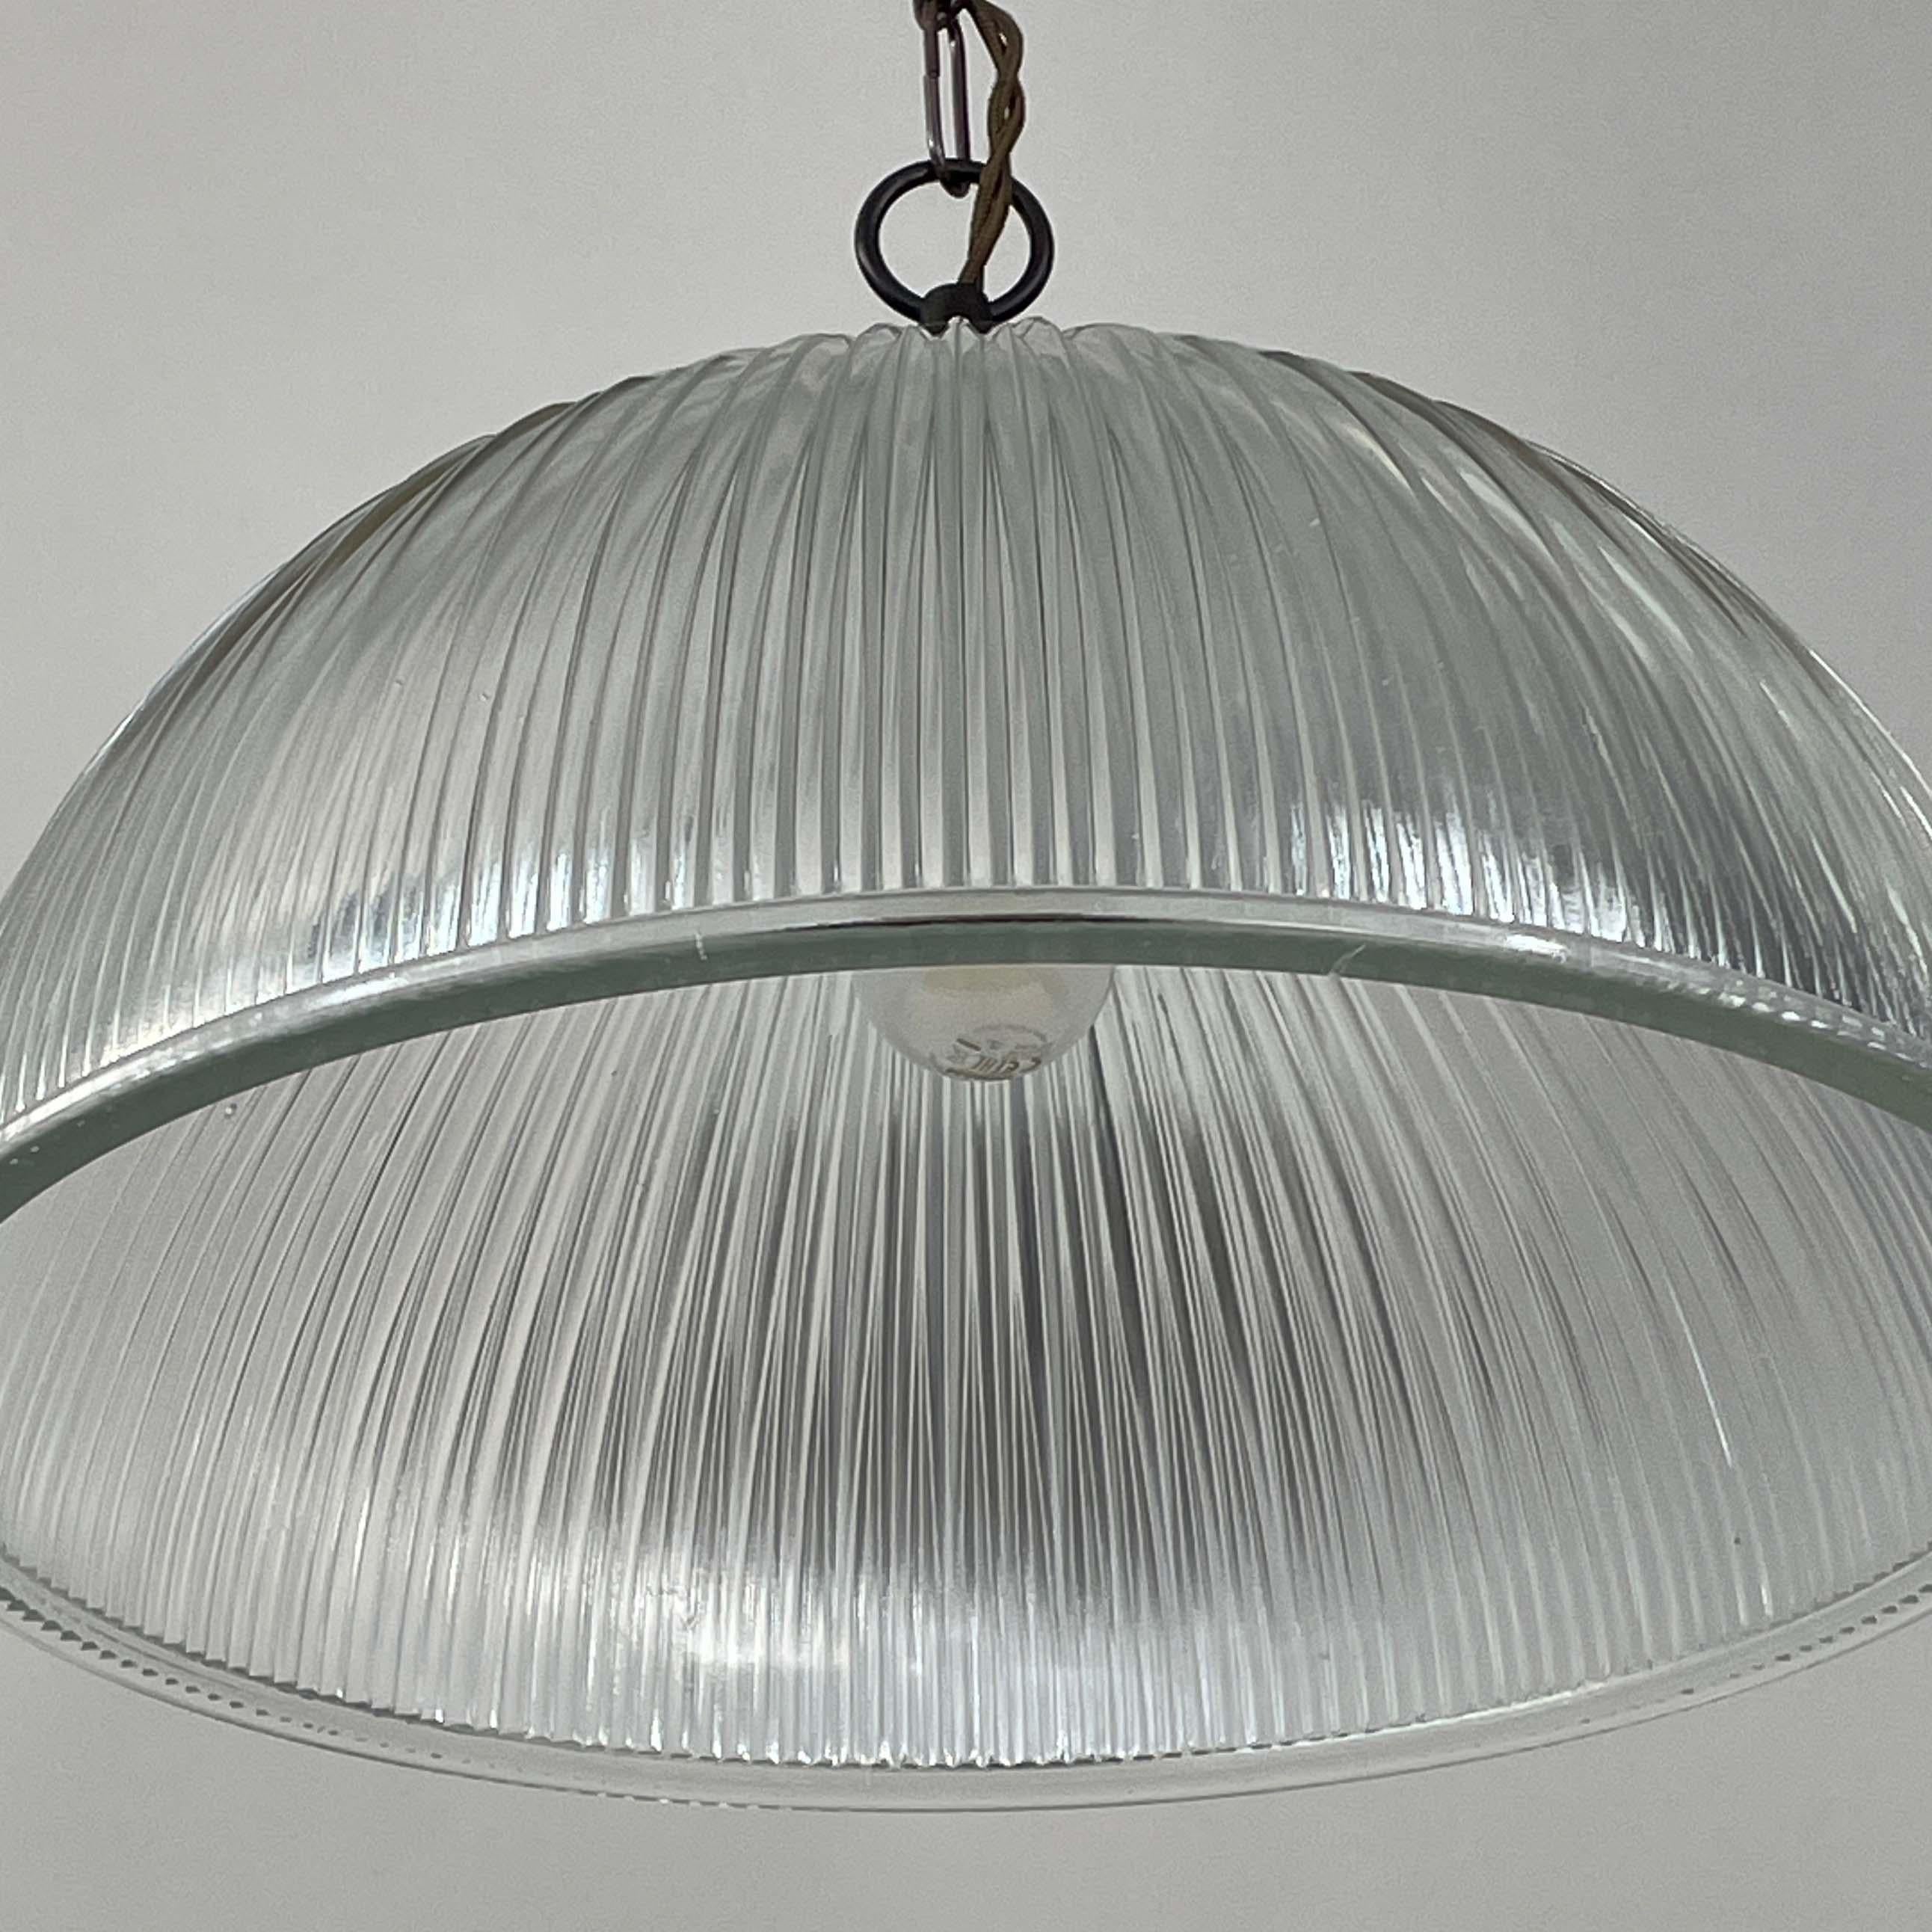 French Art Deco Holophane Industrial Glass Pendant Lamp, France, 1930s For Sale